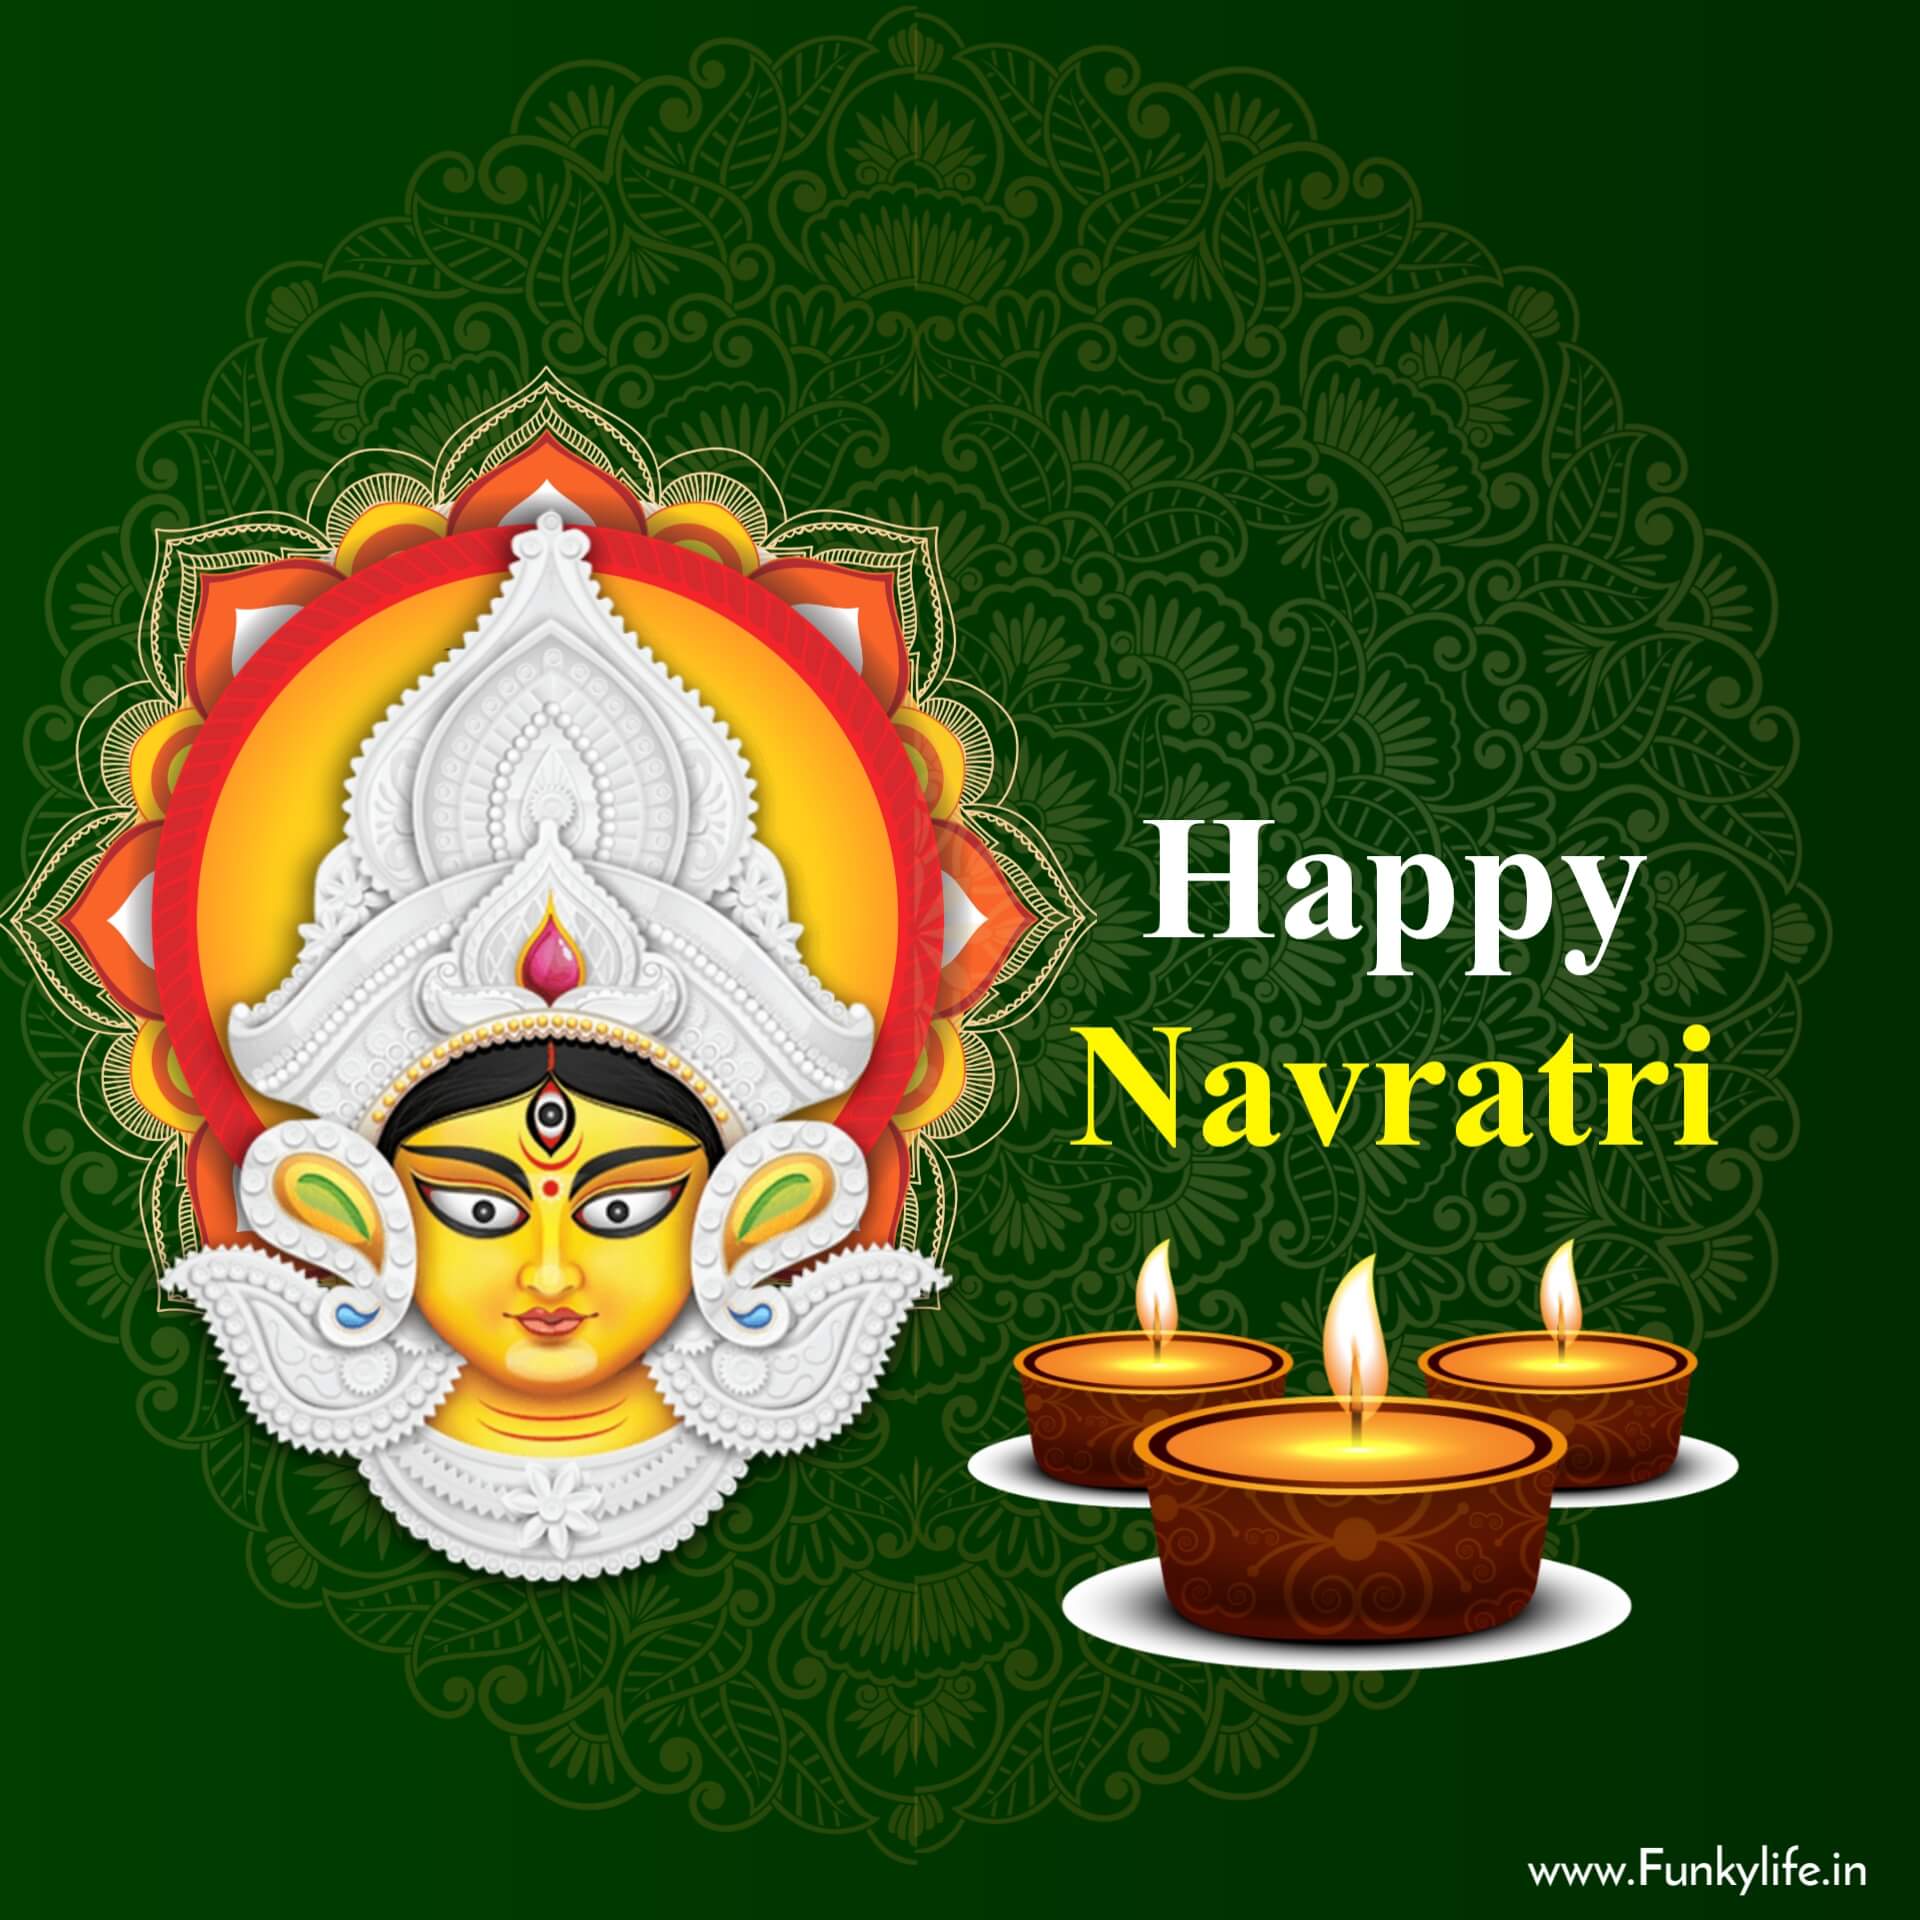 Happy Navratri Images for WhatsApp